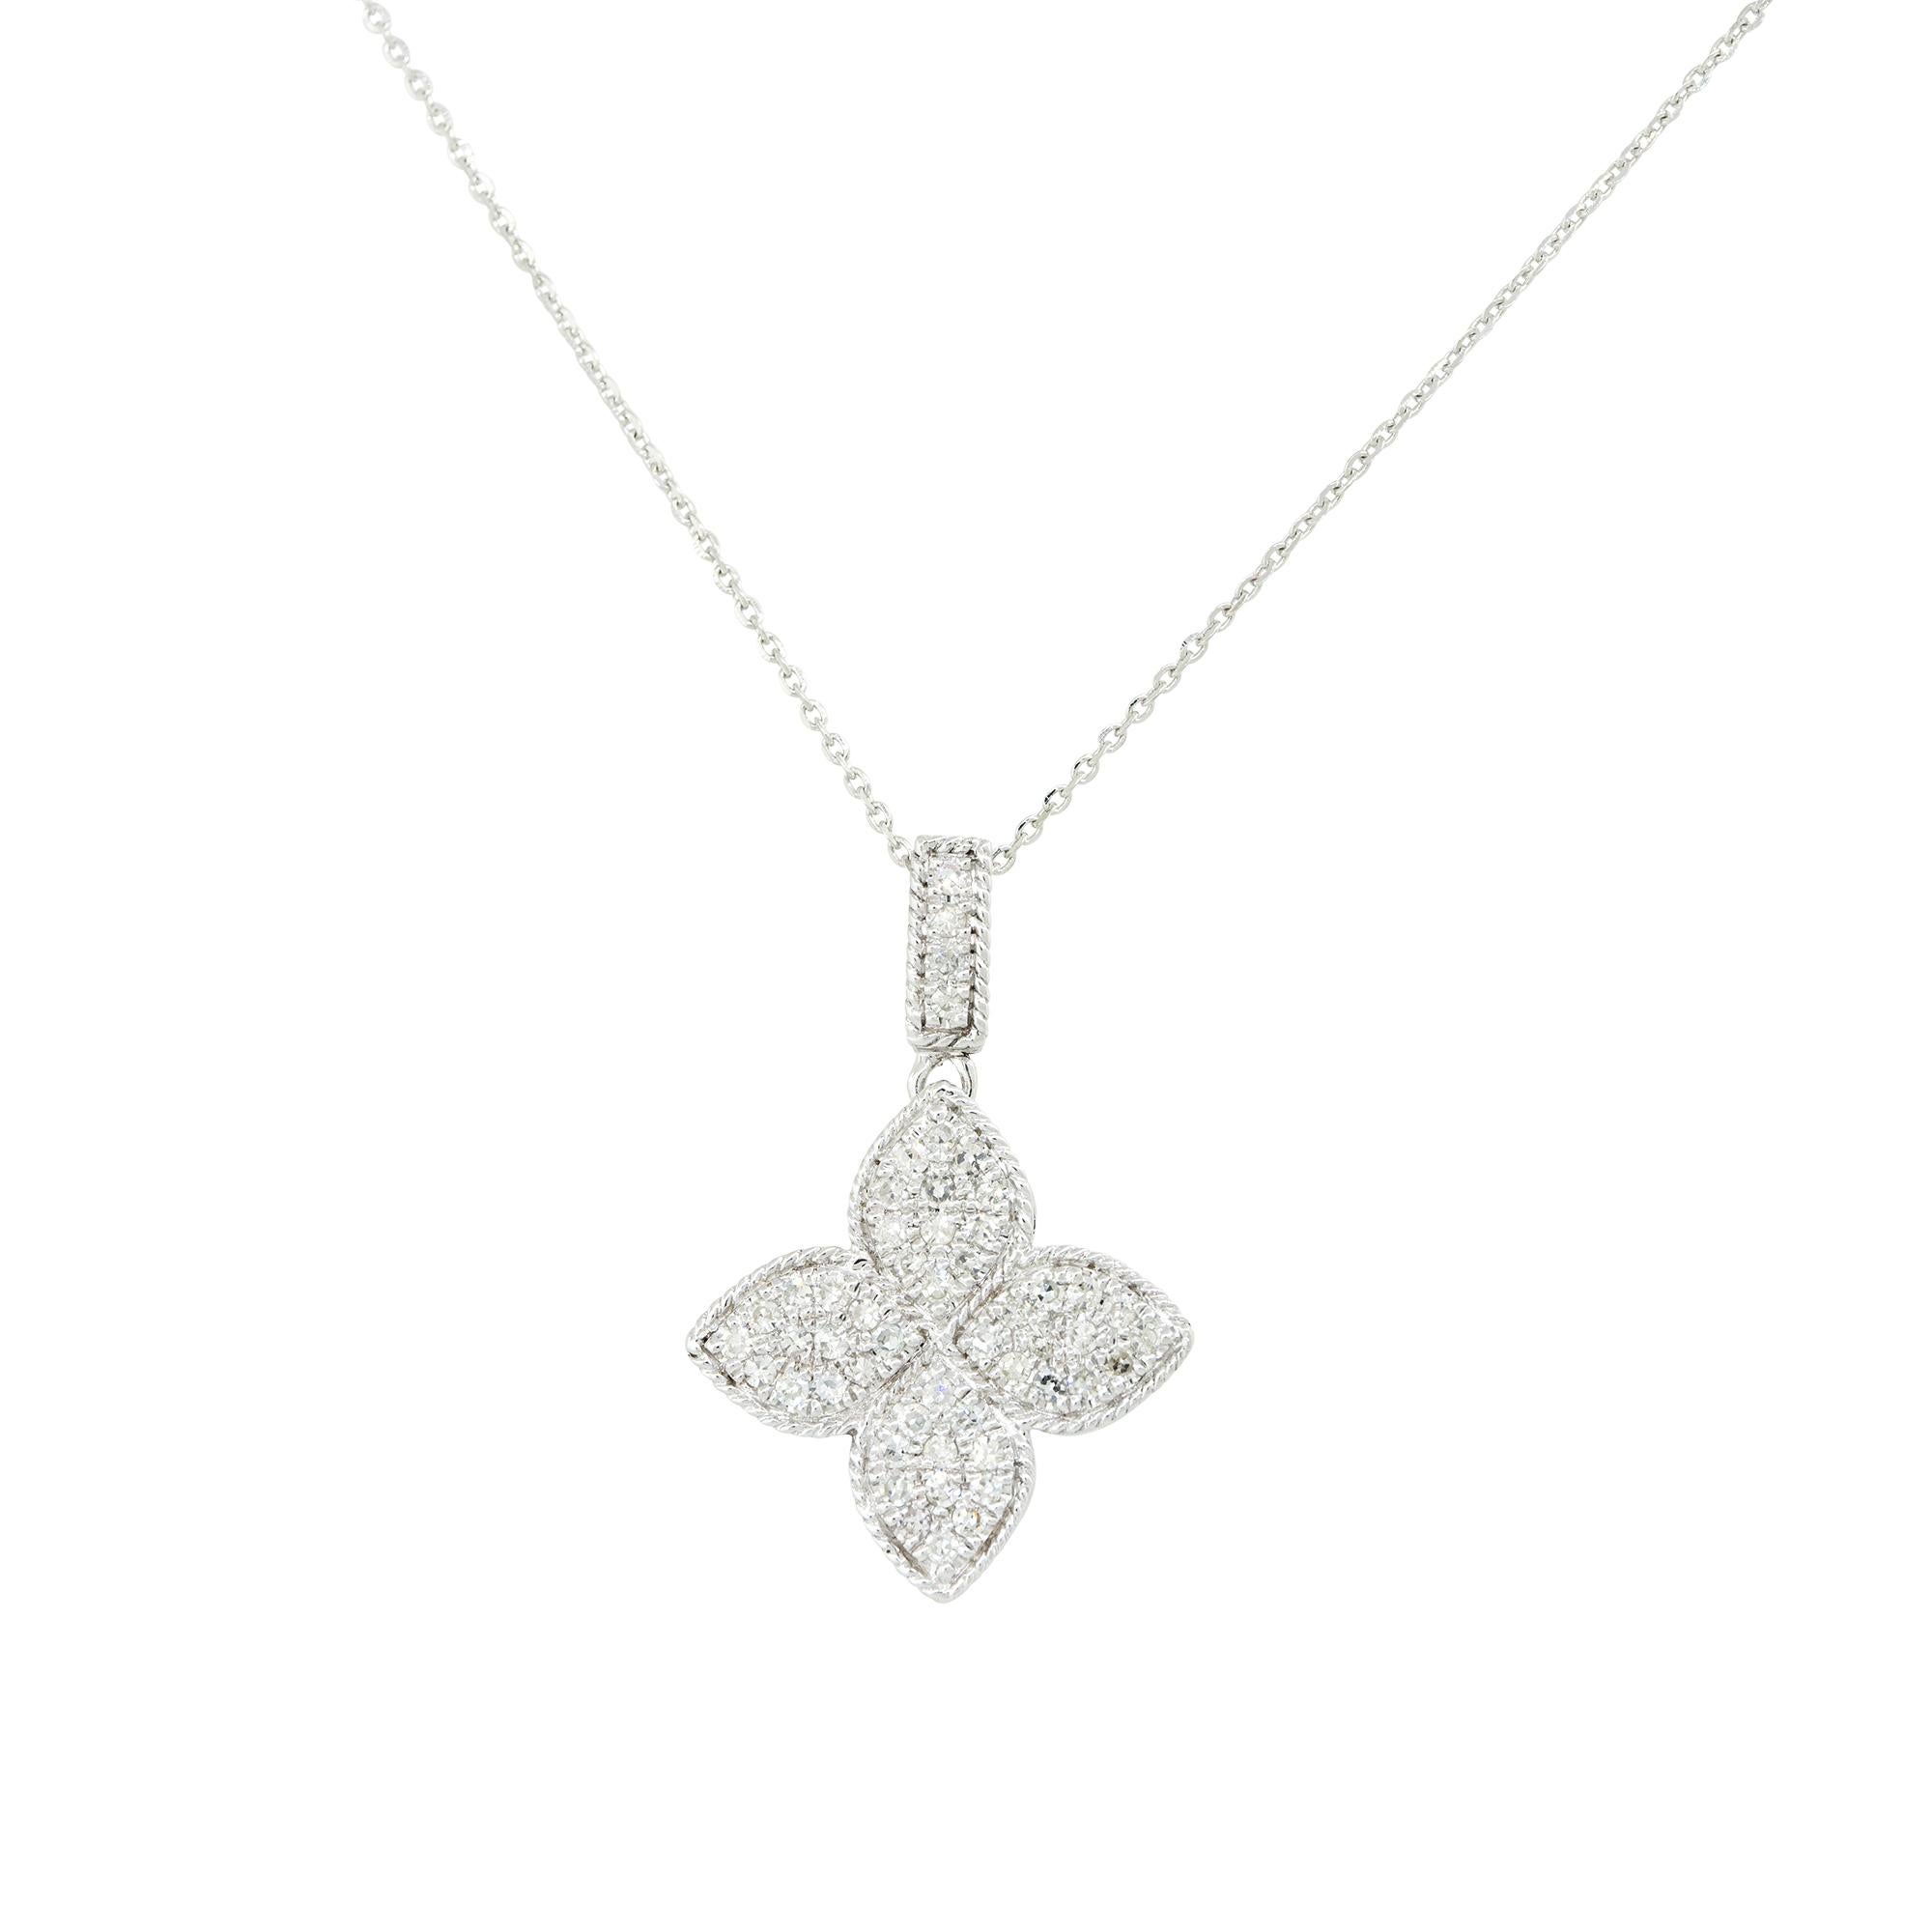 14k White Gold 0.40ctw Pave Diamond Clover Necklace
Material: 14k White Gold
Diamond Details: Diamonds are approximately 0.40 carats of Pave set, Round Brilliant cut Diamonds. All diamonds are approximately G/H in color and approximately SI in